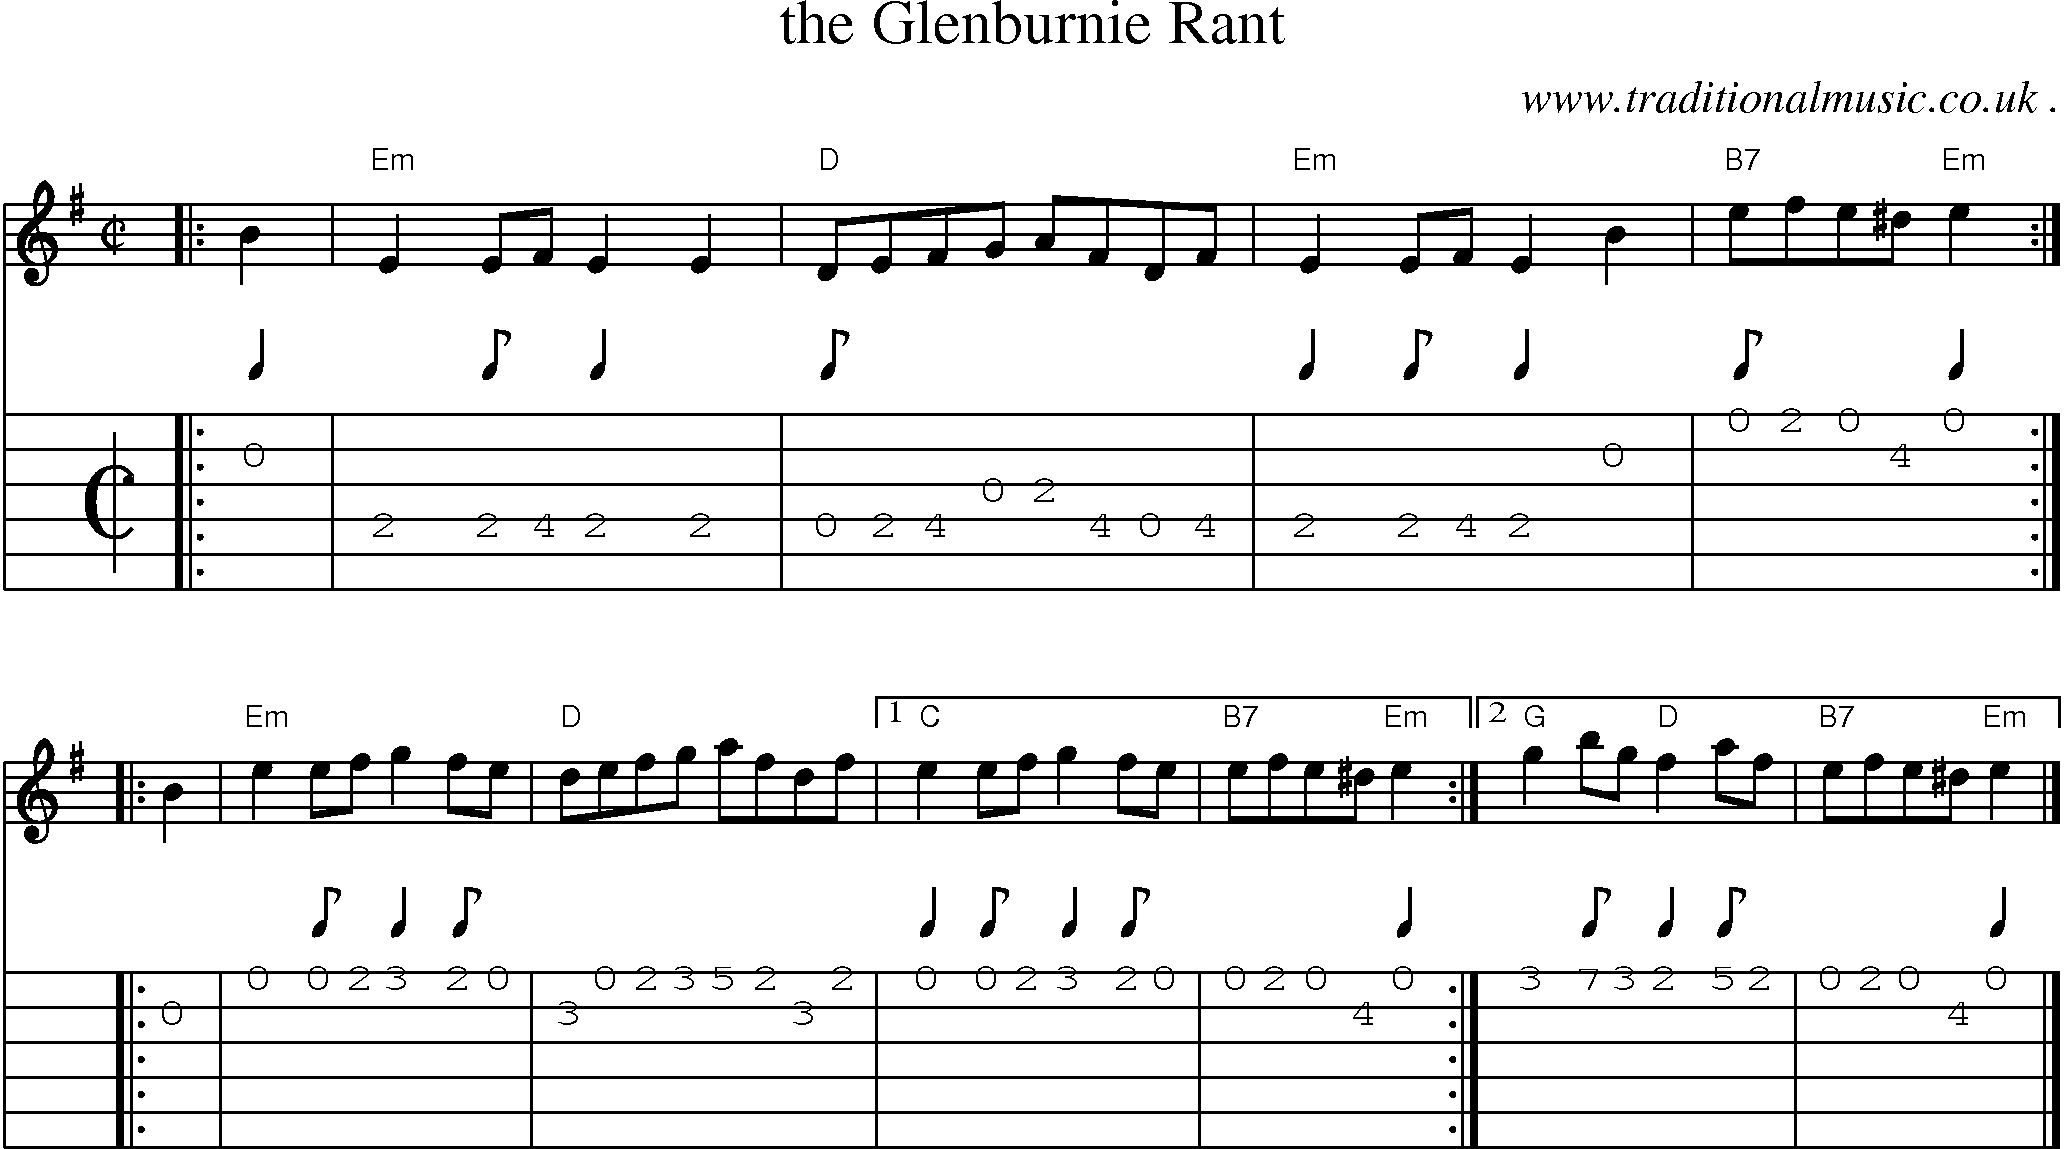 Sheet-music  score, Chords and Guitar Tabs for The Glenburnie Rant